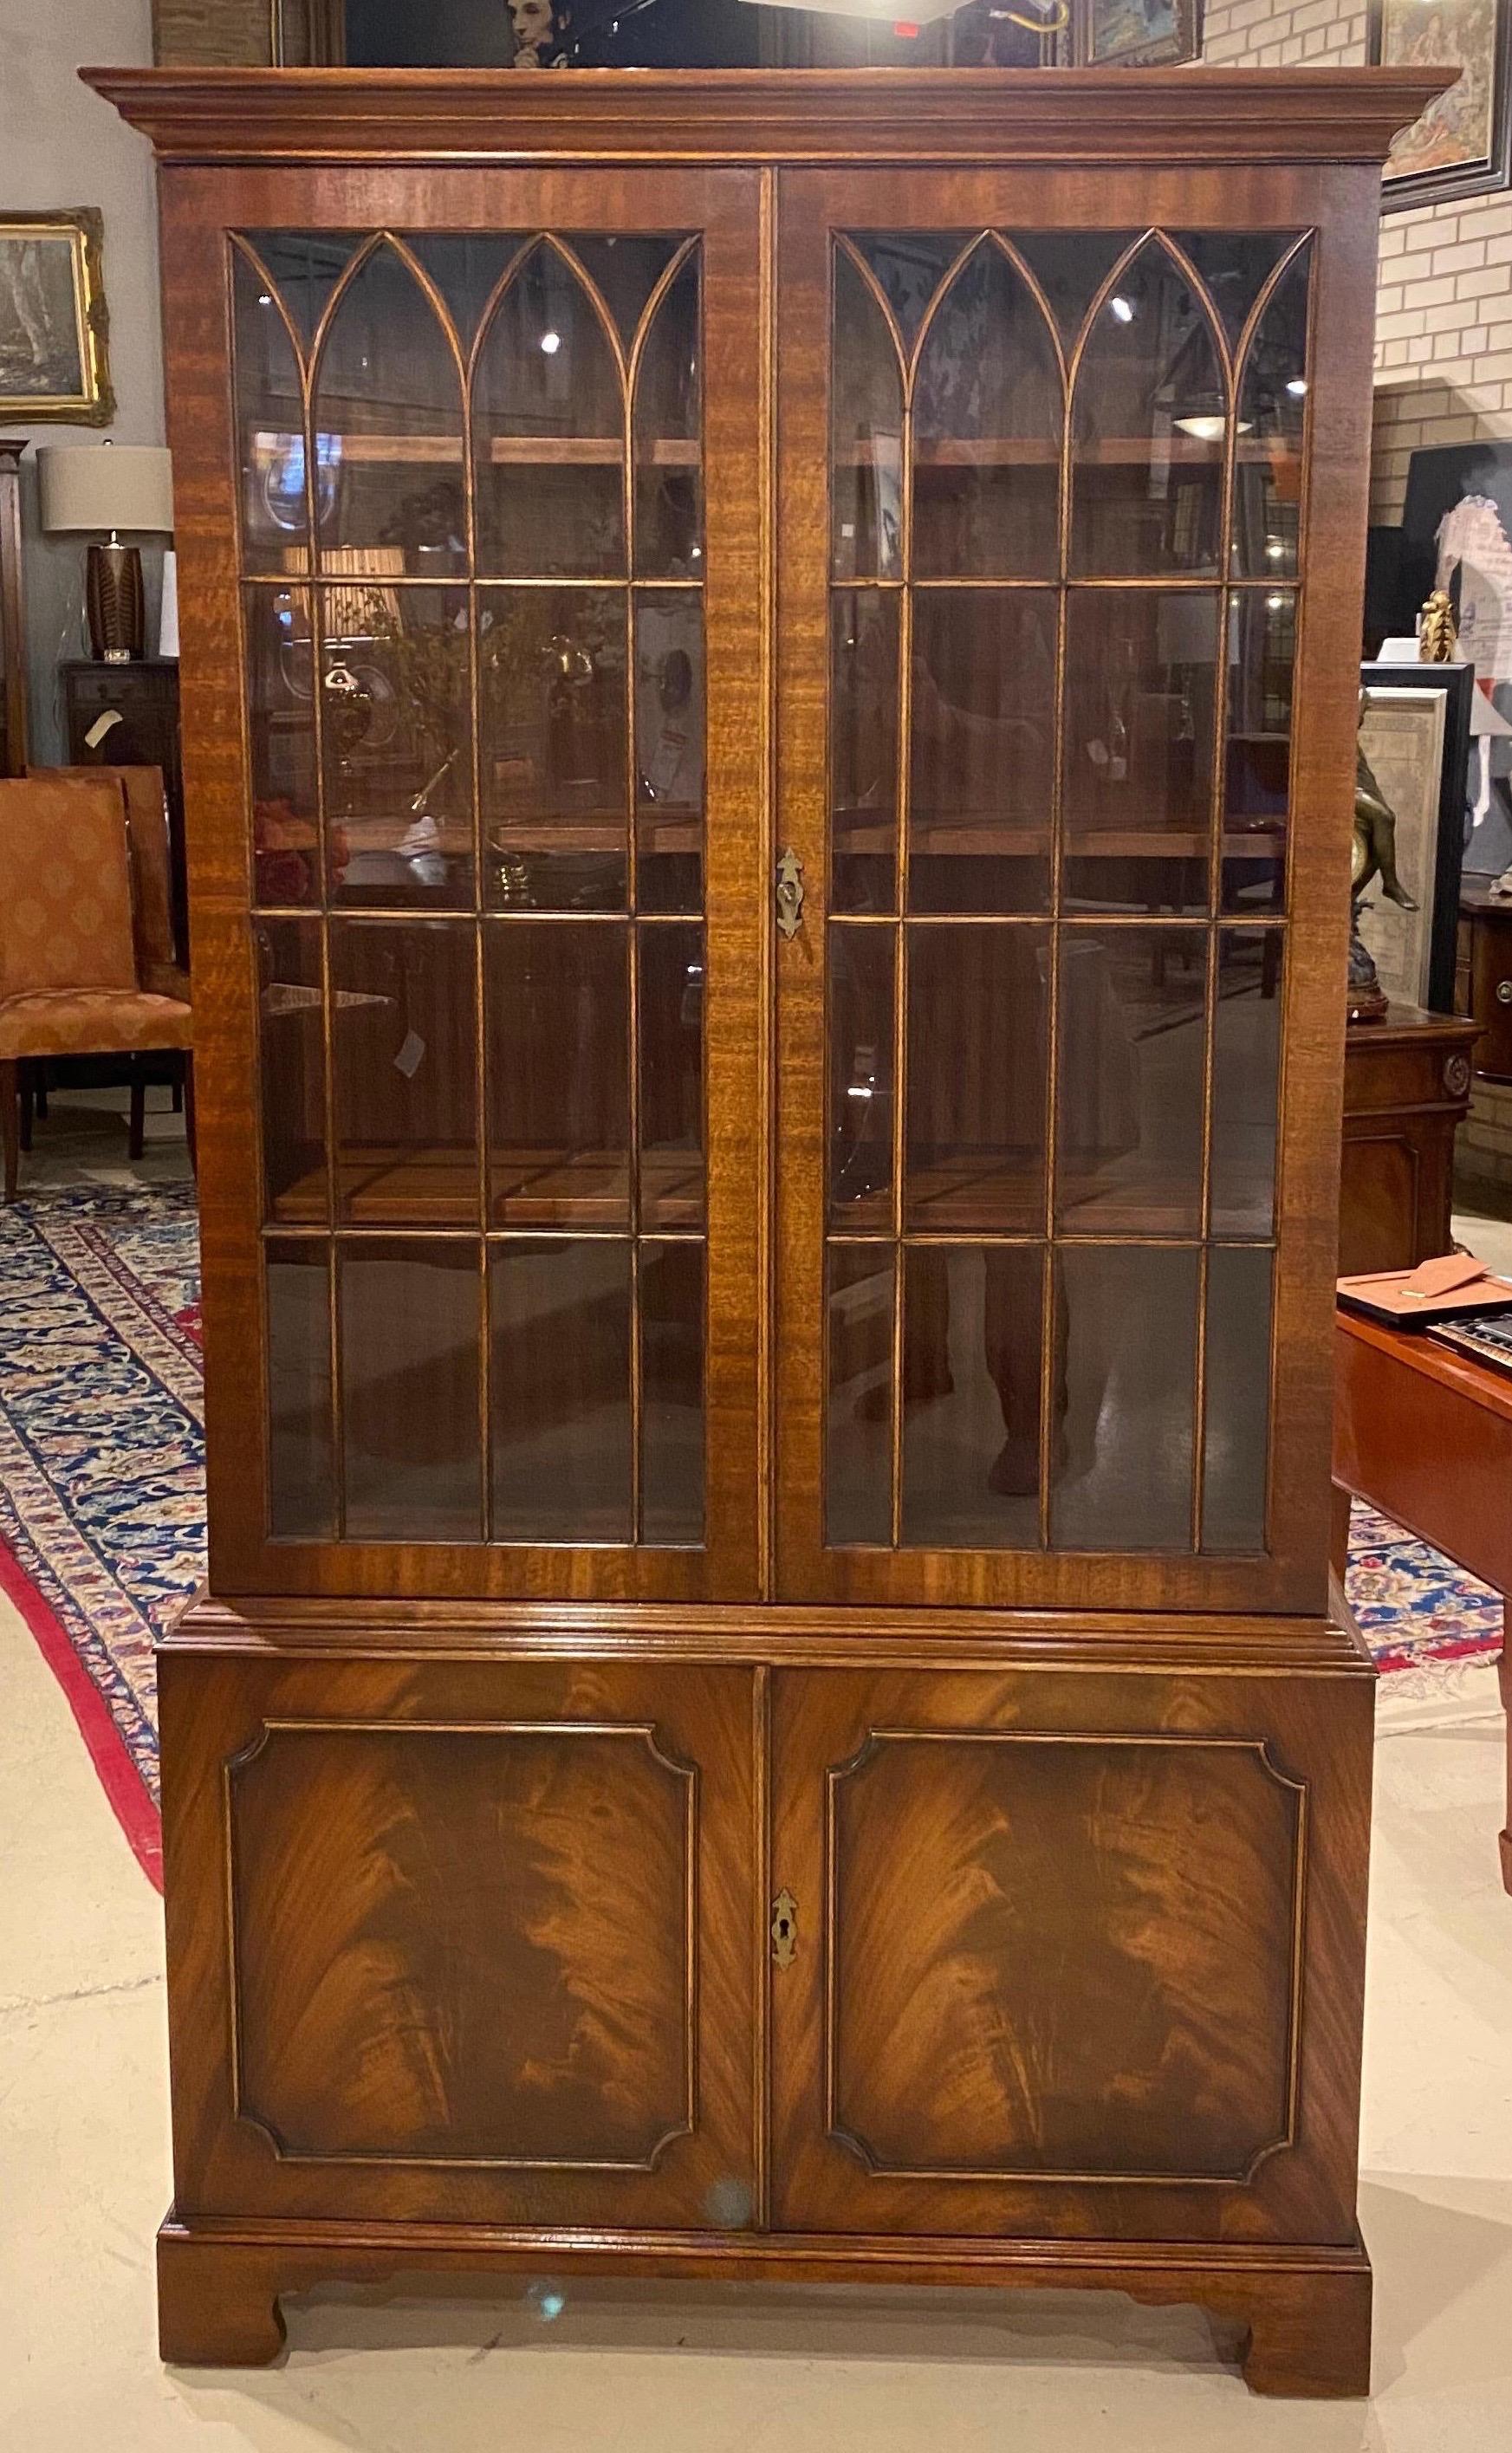 A quite lovely English bookcase made by Bevan Funnell one of England's better known cabinet shops of the 20th century. A handsome piece of a more compact scale that will add a dash of English character to any room. Two hand glazed doors as well as